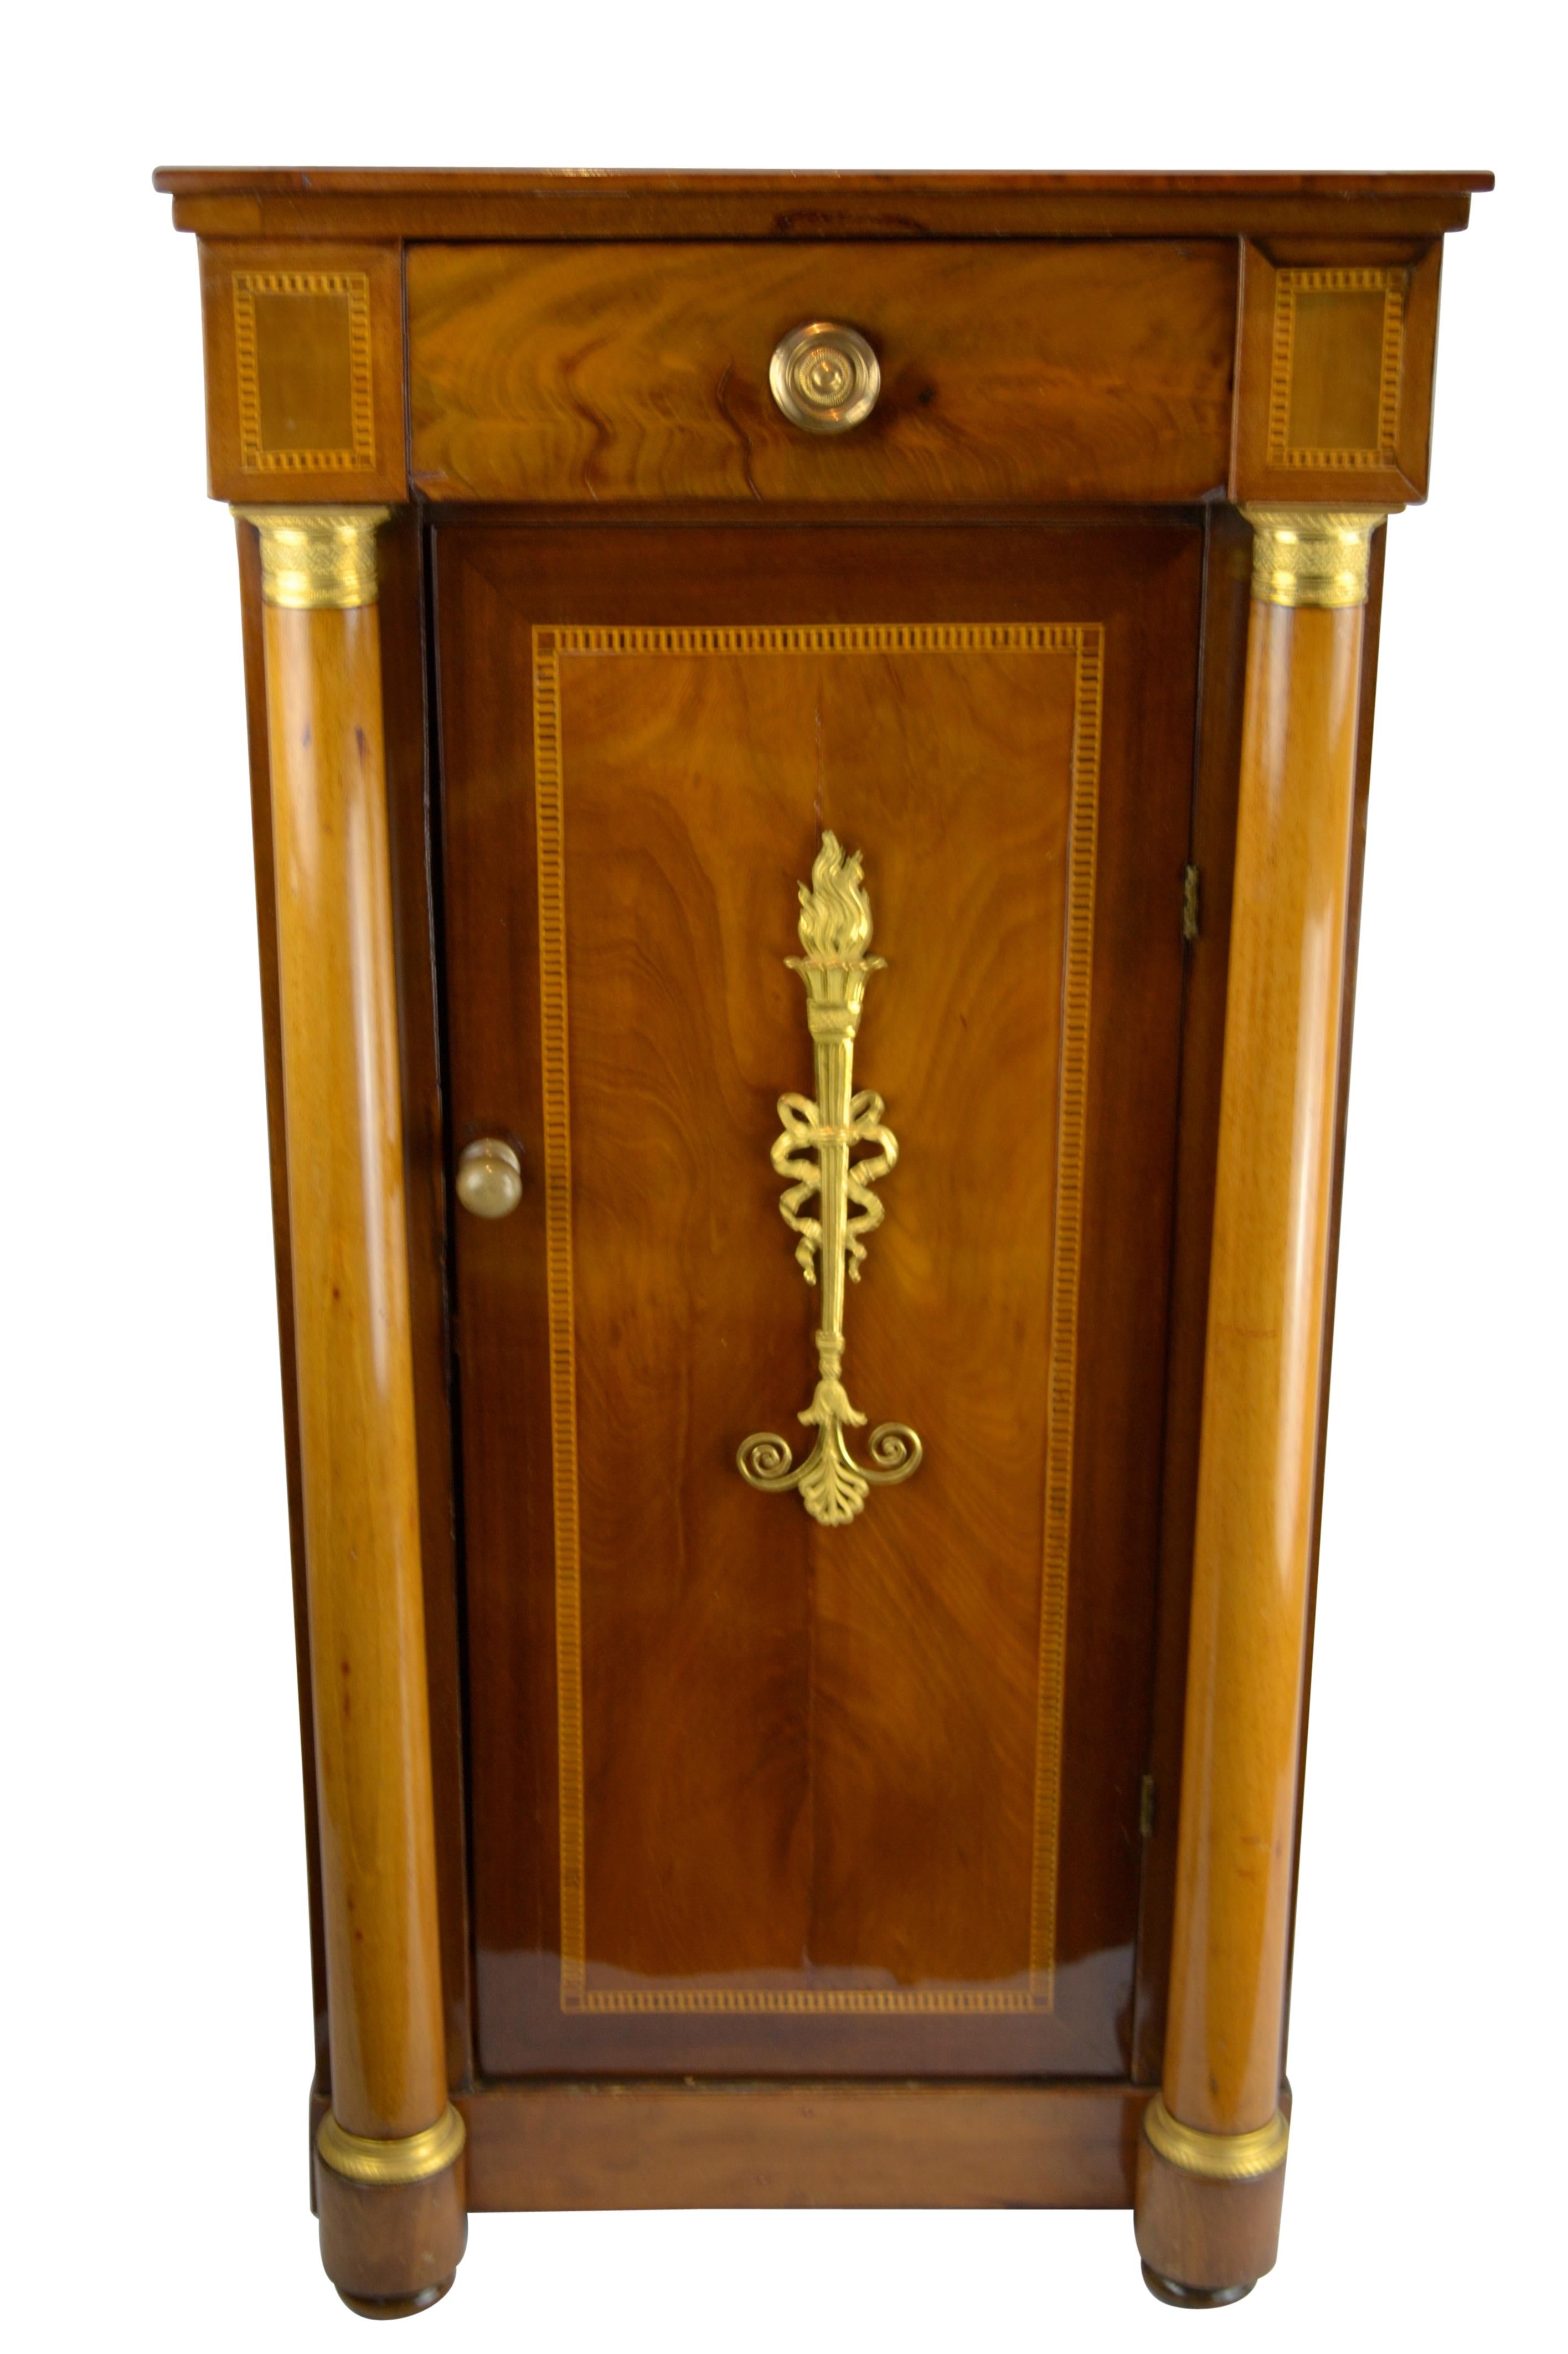 An Empire bedside table in beautifully faded mahogany and inlaid with various other exotic woods to the front and sides. The front door is framed in circular columns with gilt moldings to the top and bottom. The front door is decorated with a fine